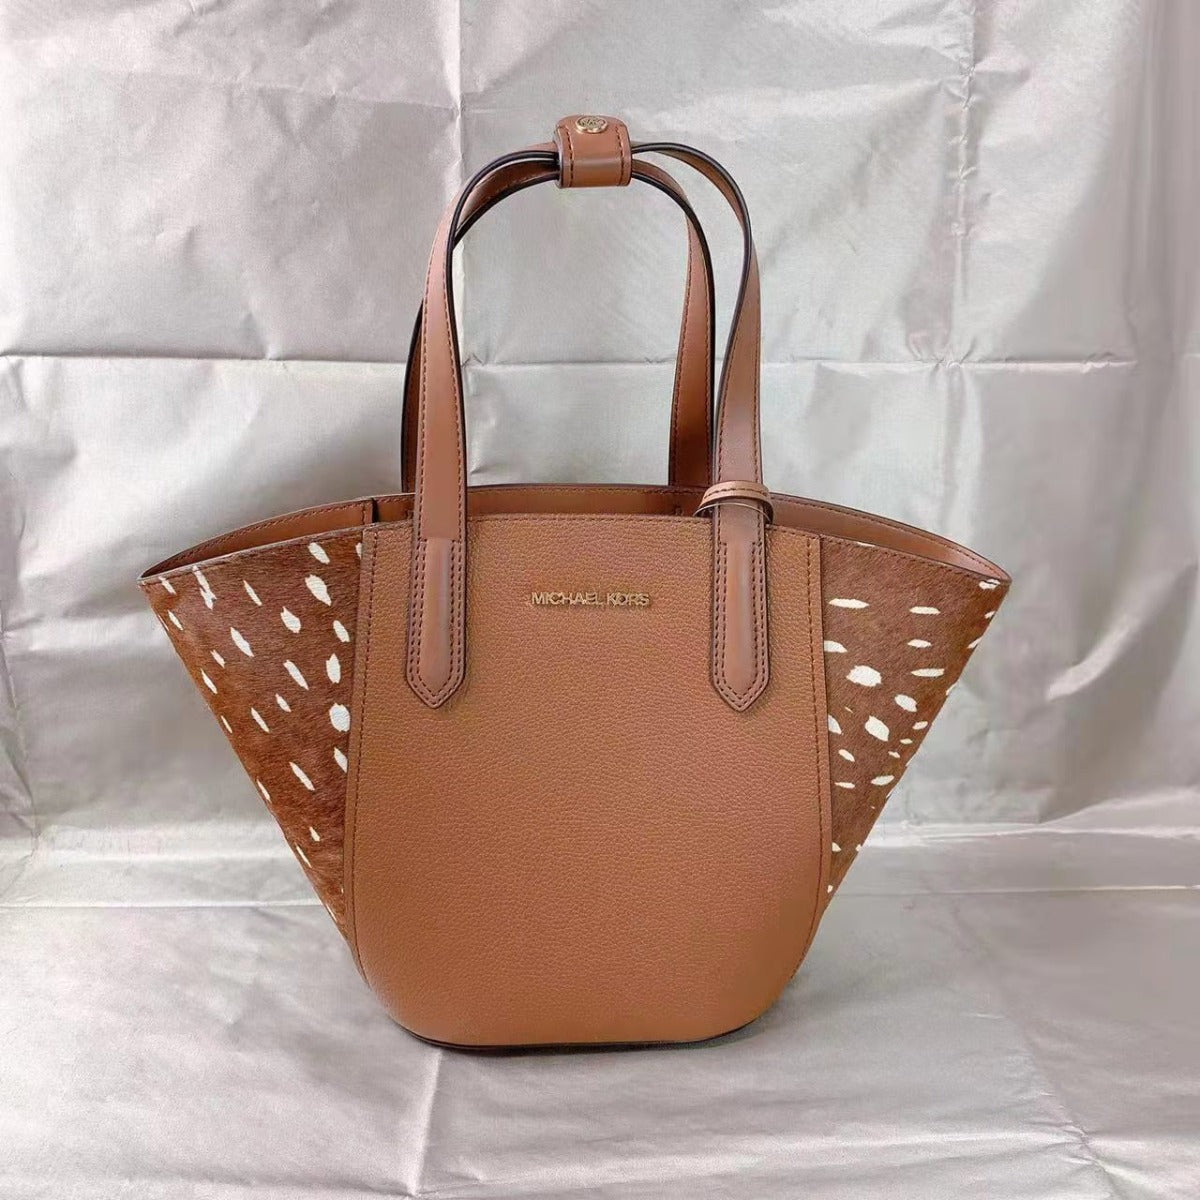 MICHAEL KORS 35F1GPAT5H PORTIA SMALL TOTE PEBBLED LEATHER HAIRCALF ACCENT BROWN MULT